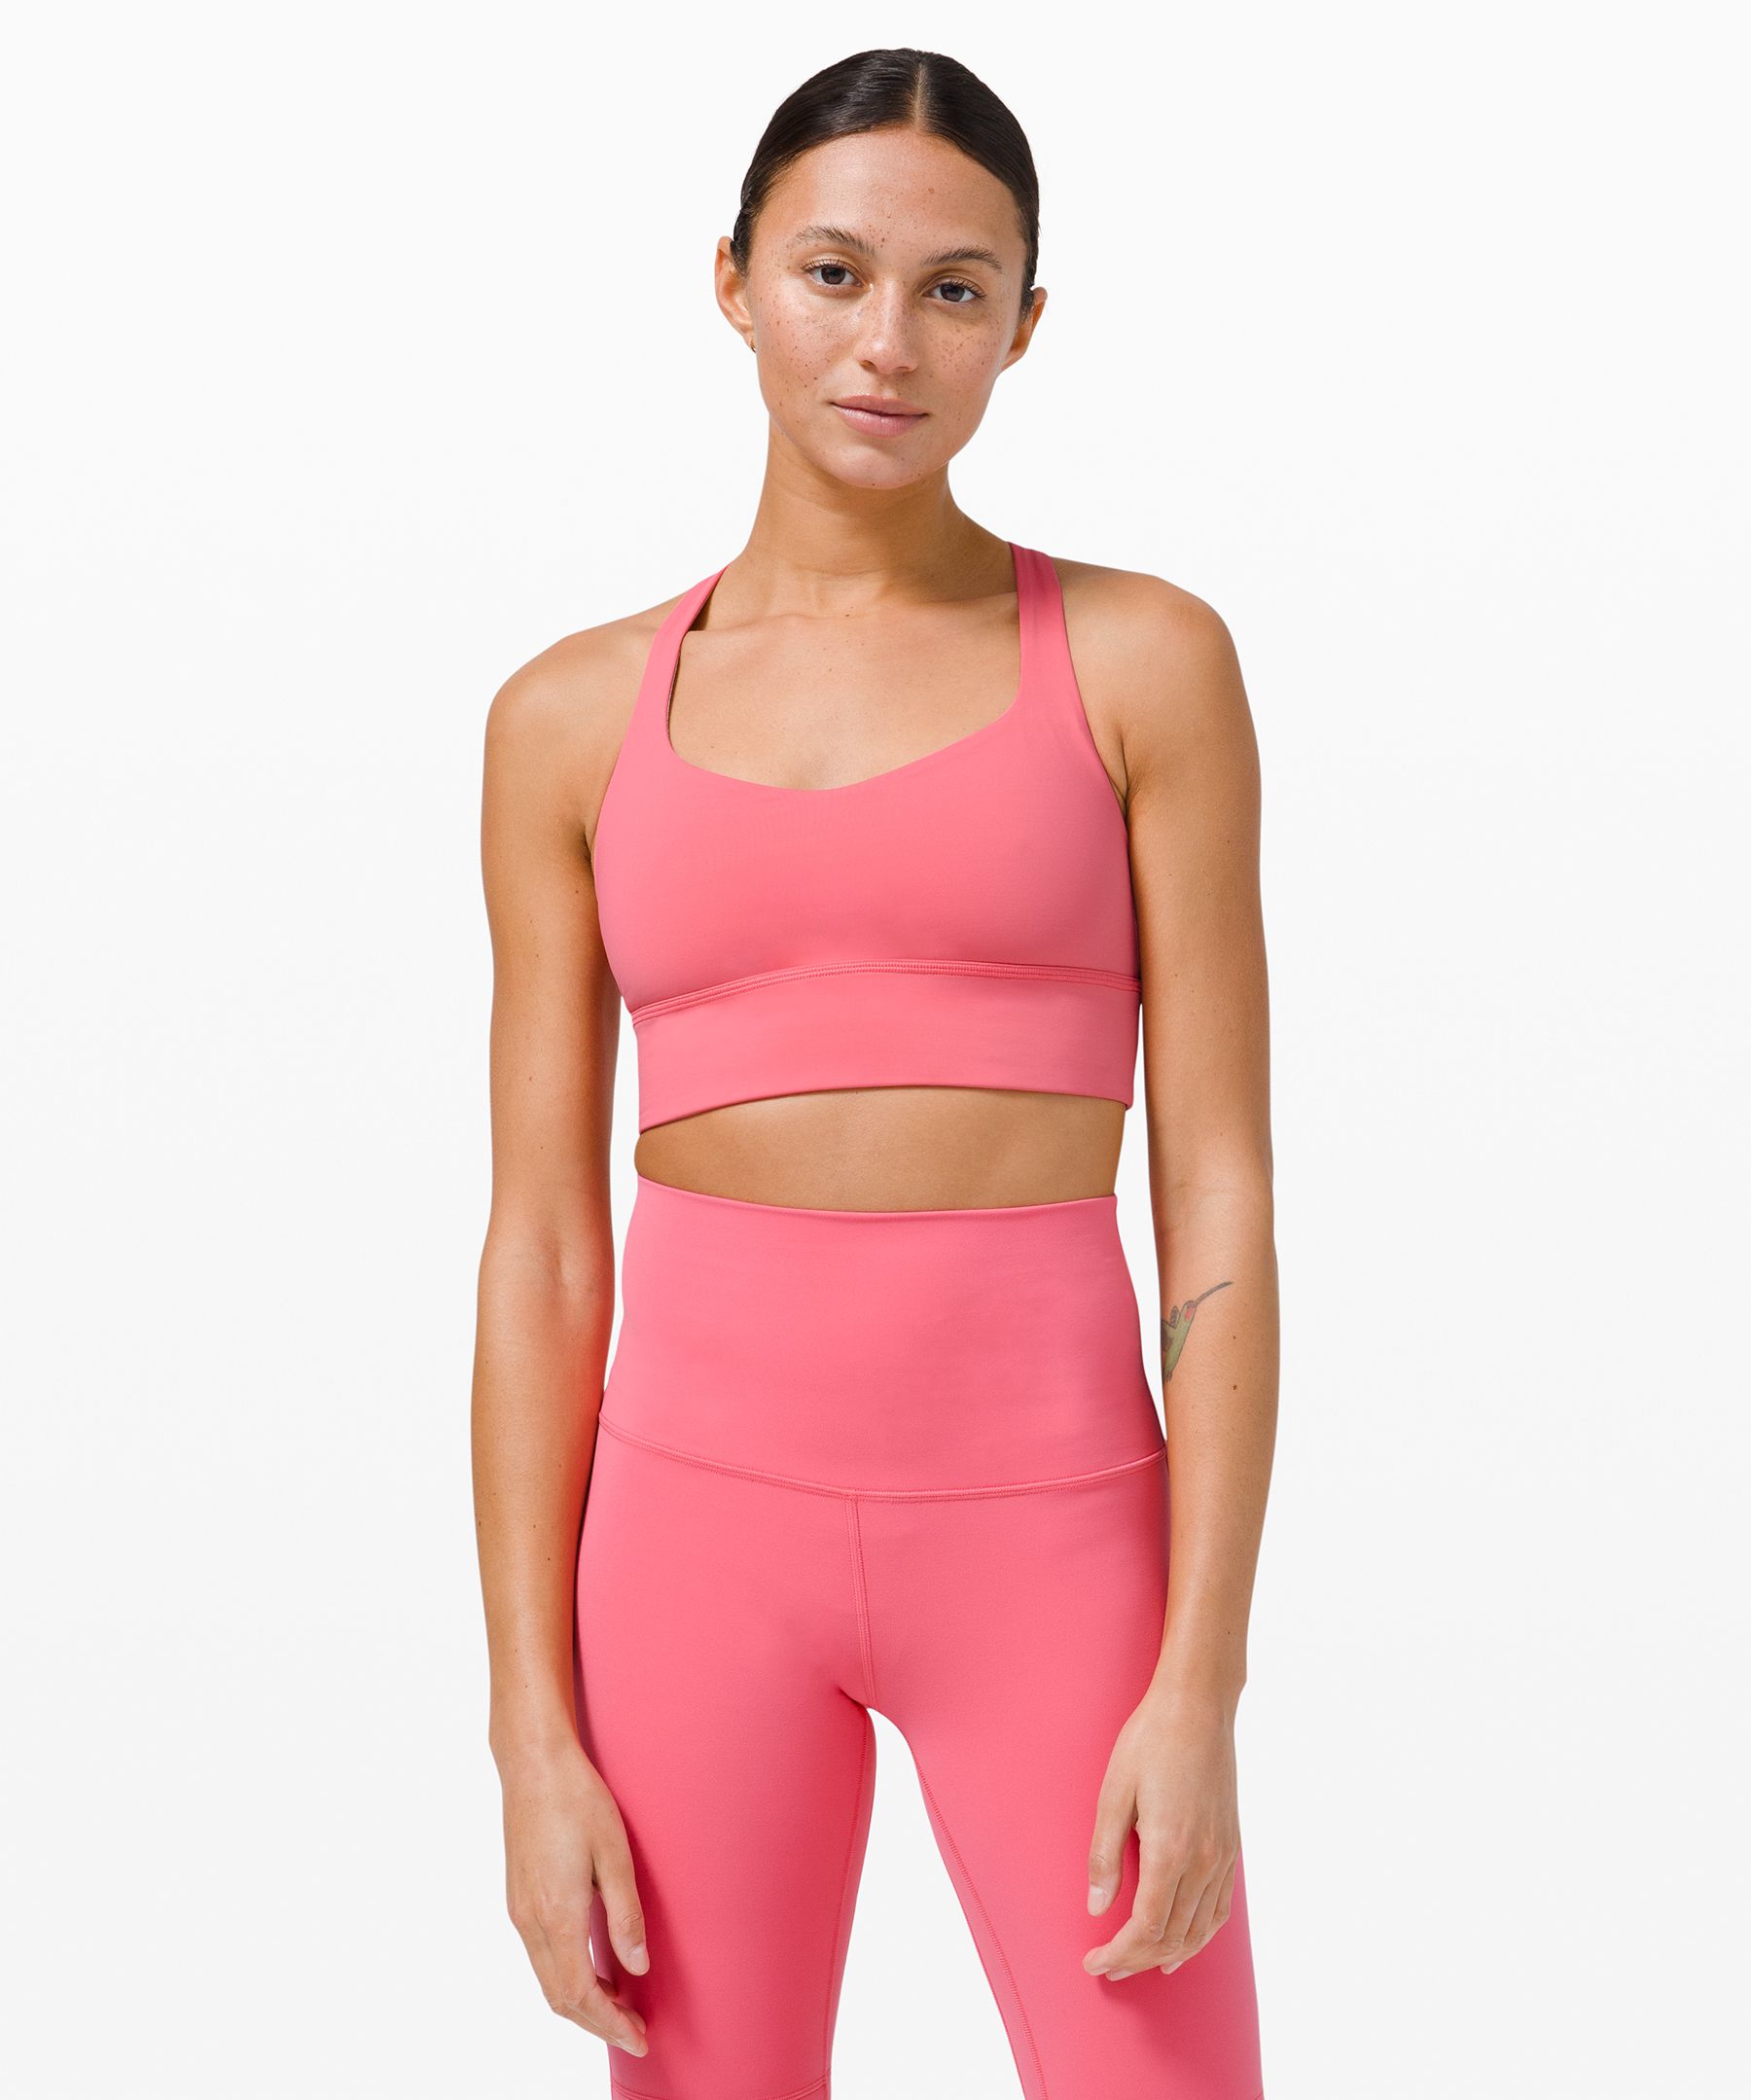 Lululemon Wild *light Support, A/b Cups Online Only In Neon